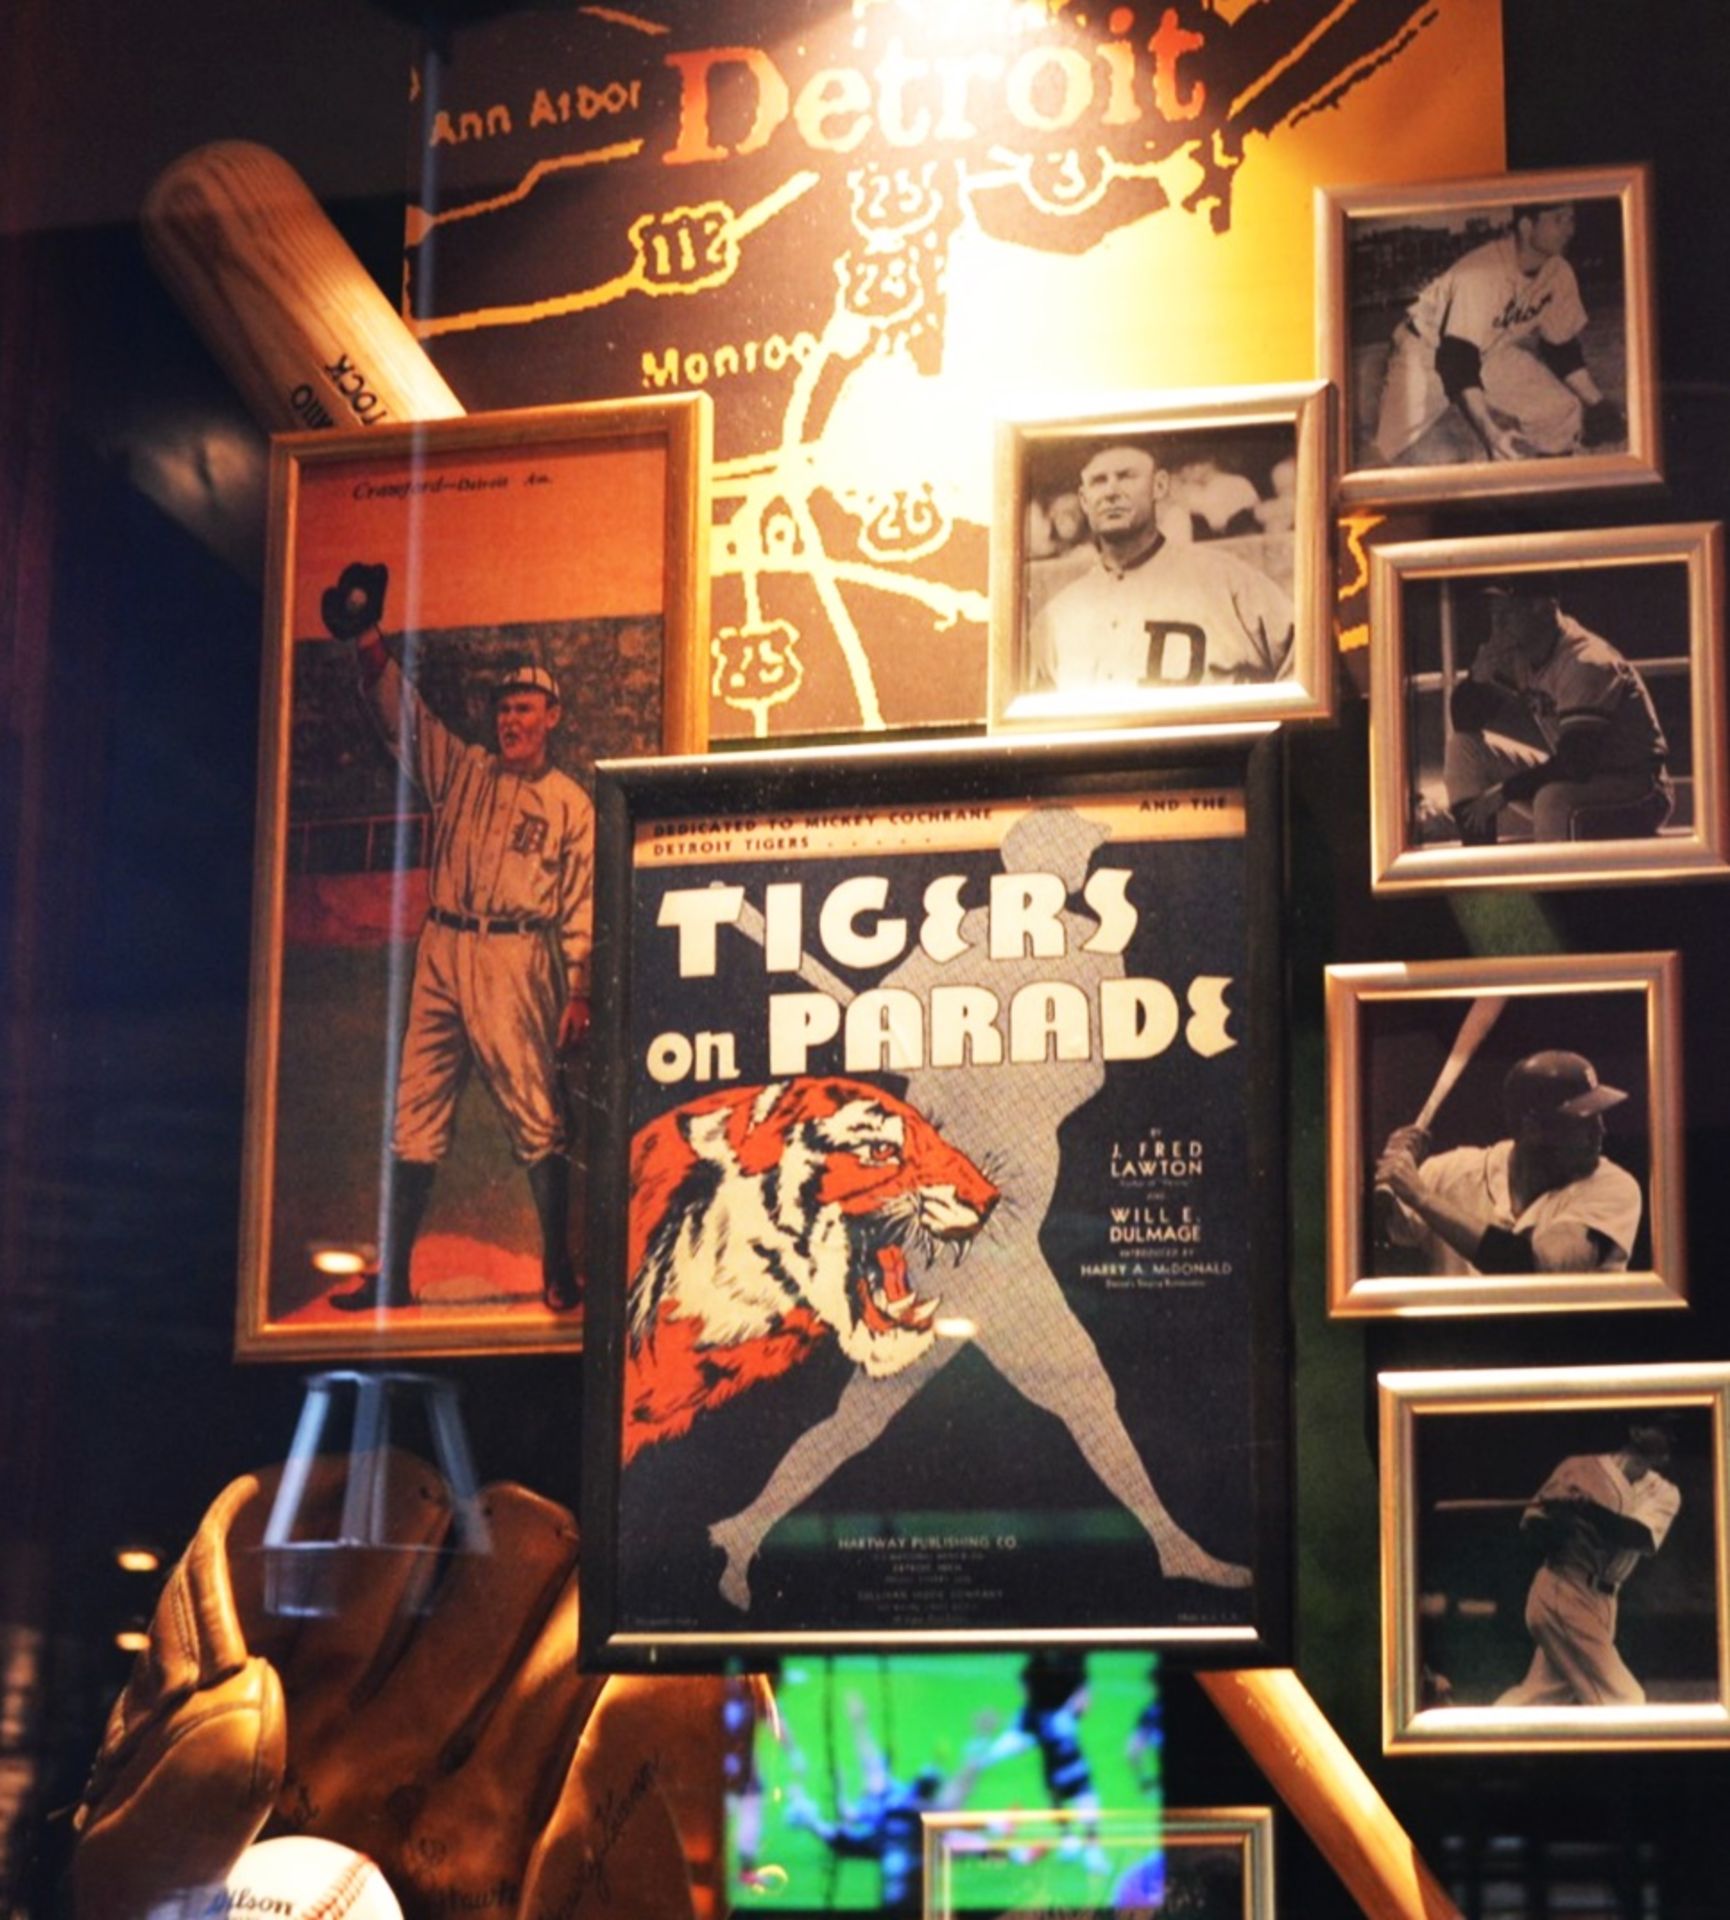 1 x Americana Wall Mounted Illuminated Display Case - DETROIT TIGERS BASEBALL - Includes Various - Image 5 of 5